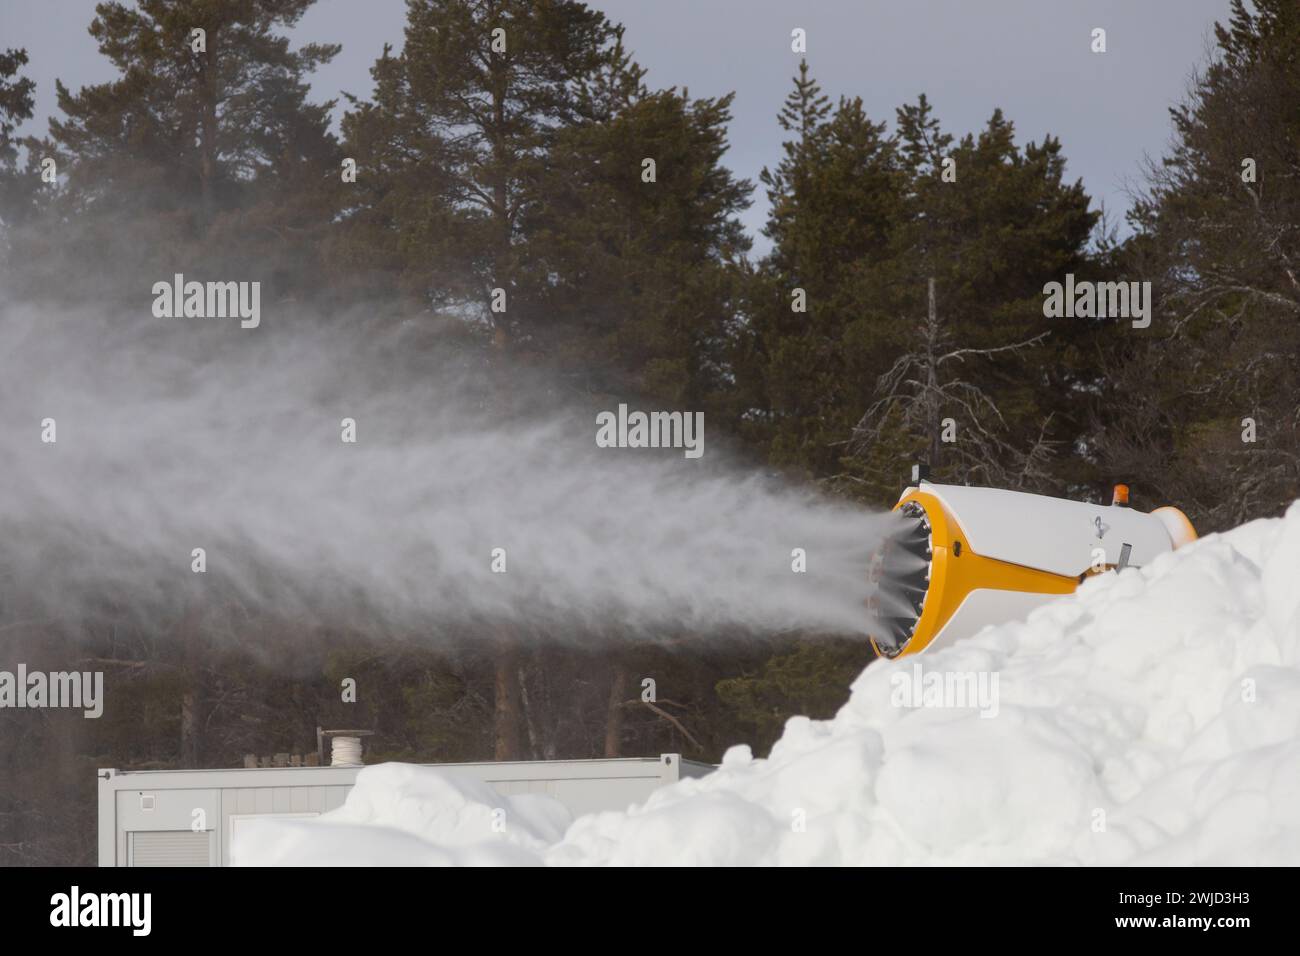 Snow cannon in operation making snow. Shot at Idre fjäll in Sweden, Scandinavia Stock Photo